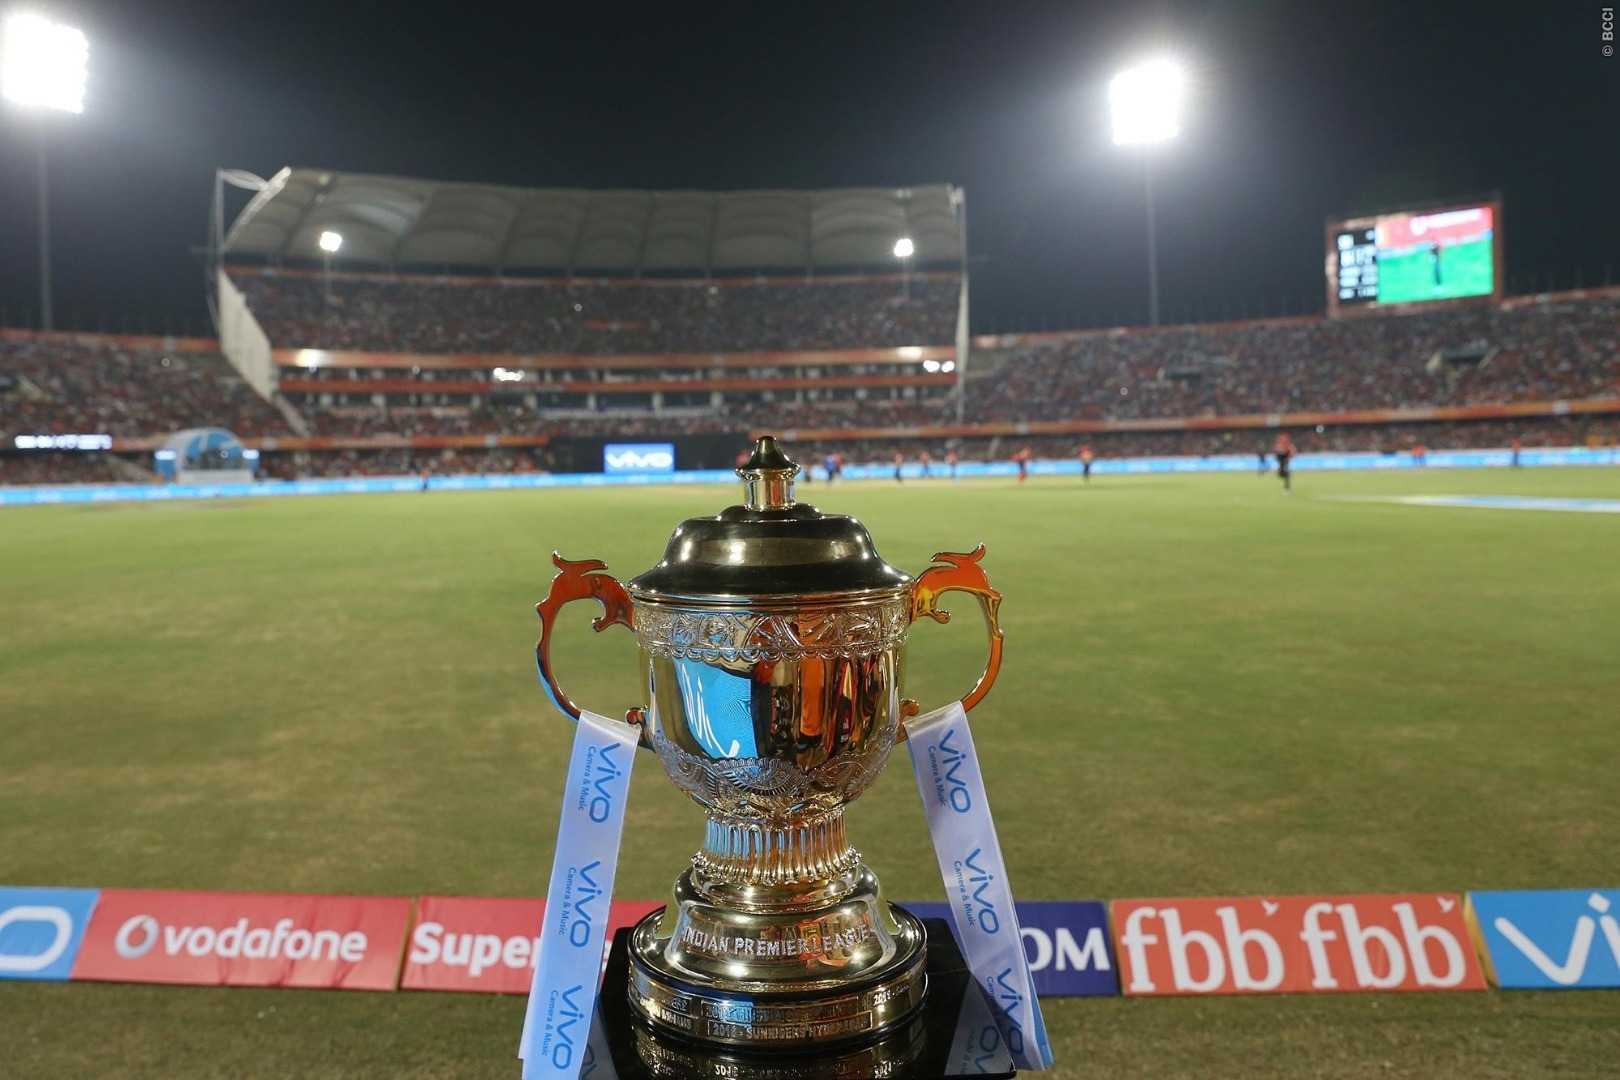 BCCI turns down ICC request for rescheduling IPL match BCCI turns down ICC request for rescheduling IPL match